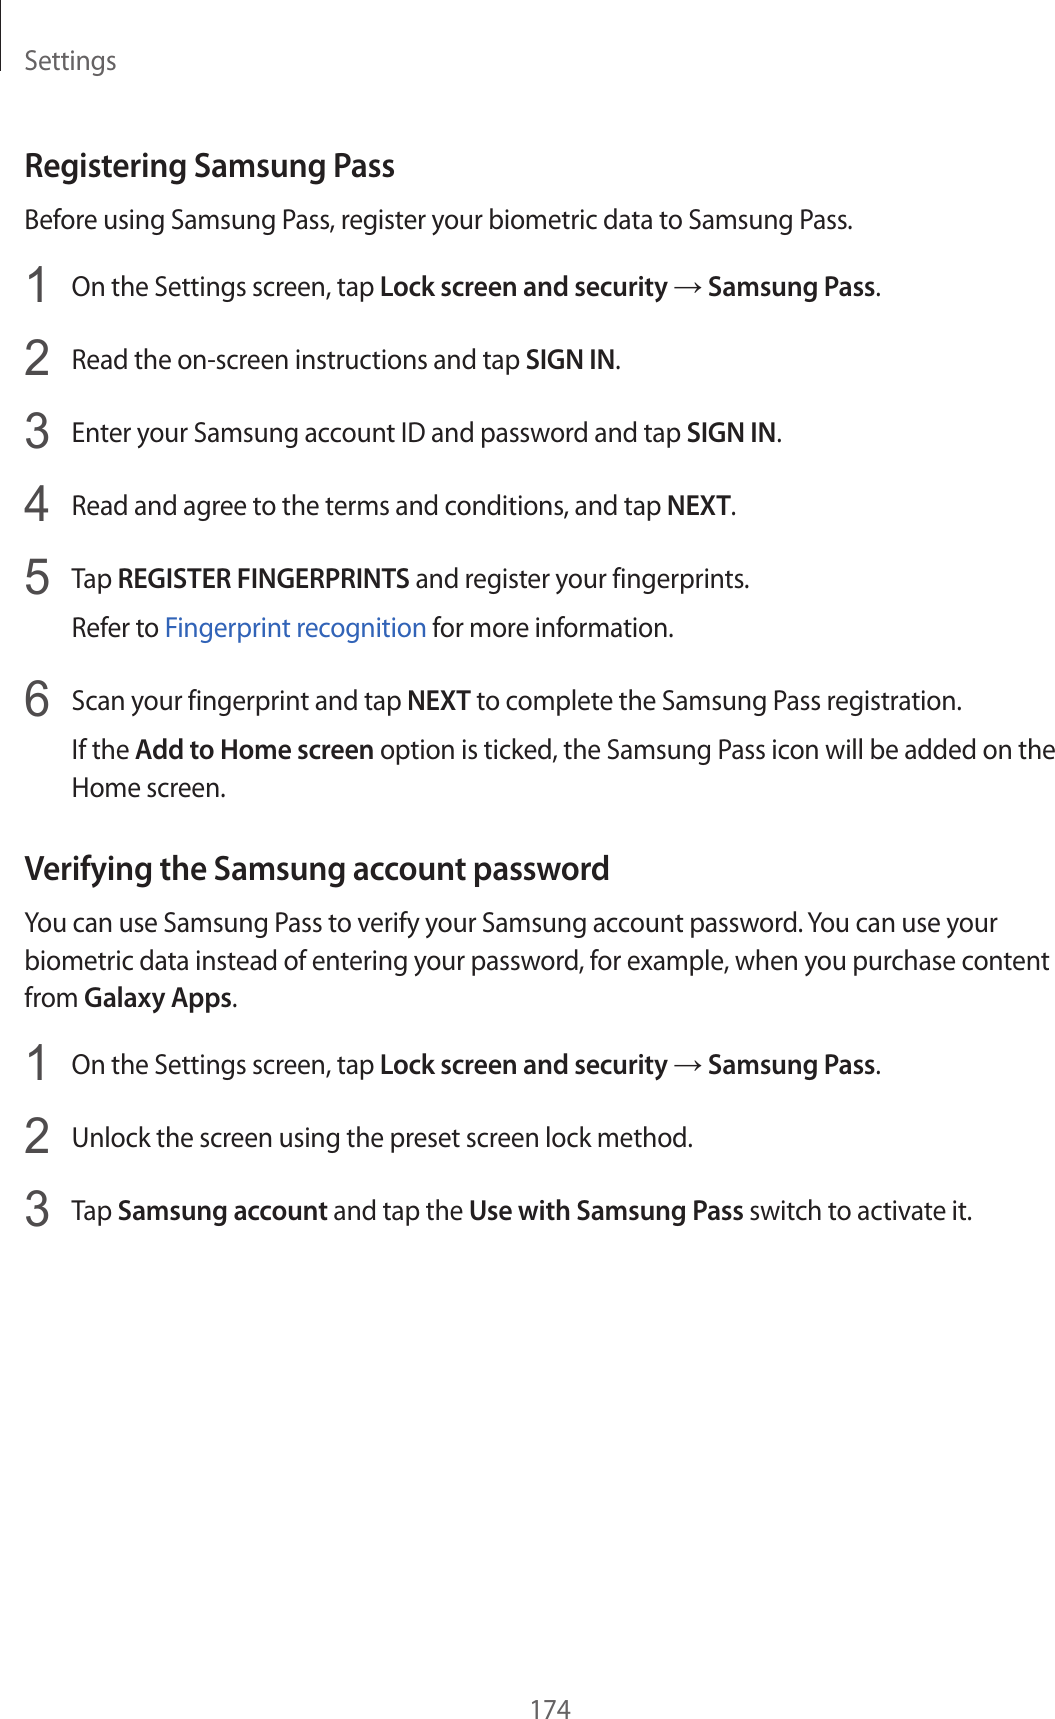 Settings174Registering Samsung PassBefore using Samsung Pass, register your biometric data to Samsung Pass.1  On the Settings screen, tap Lock screen and security → Samsung Pass.2  Read the on-screen instructions and tap SIGN IN.3  Enter your Samsung account ID and password and tap SIGN IN.4  Read and agree to the terms and conditions, and tap NEXT.5  Tap REGISTER FINGERPRINTS and register your fingerprints.Refer to Fingerprint recognition for more information.6  Scan your fingerprint and tap NEXT to complete the Samsung Pass registration.If the Add to Home screen option is ticked, the Samsung Pass icon will be added on the Home screen.Verifying the Samsung account passwordYou can use Samsung Pass to verify your Samsung account password. You can use your biometric data instead of entering your password, for example, when you purchase content from Galaxy Apps.1  On the Settings screen, tap Lock screen and security → Samsung Pass.2  Unlock the screen using the preset screen lock method.3  Tap Samsung account and tap the Use with Samsung Pass switch to activate it.